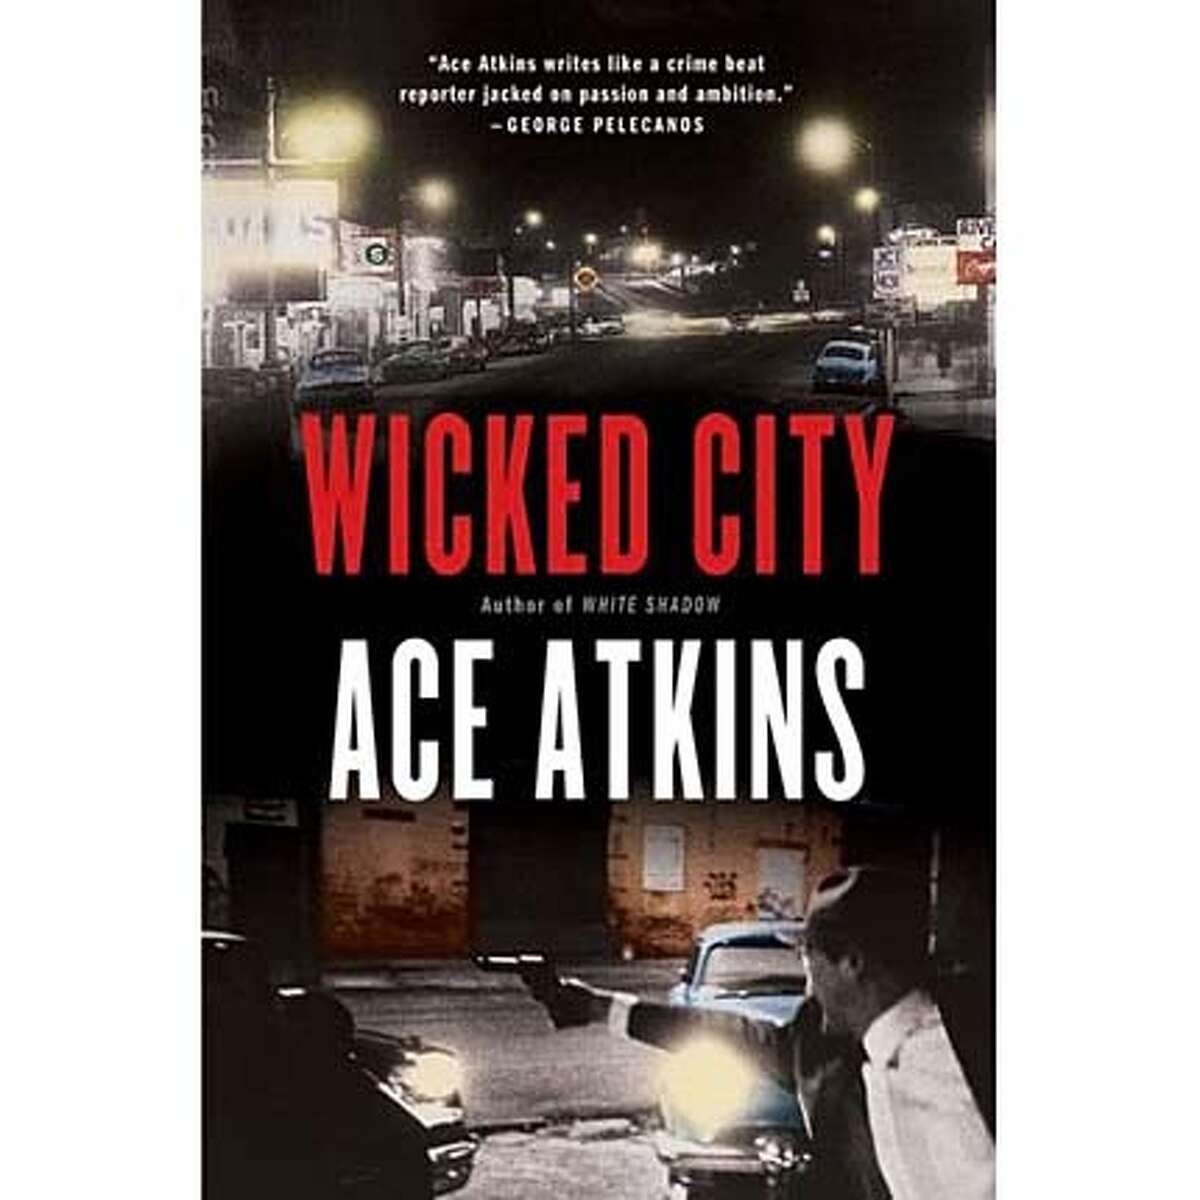 "Wicked City" by Ace Atkins